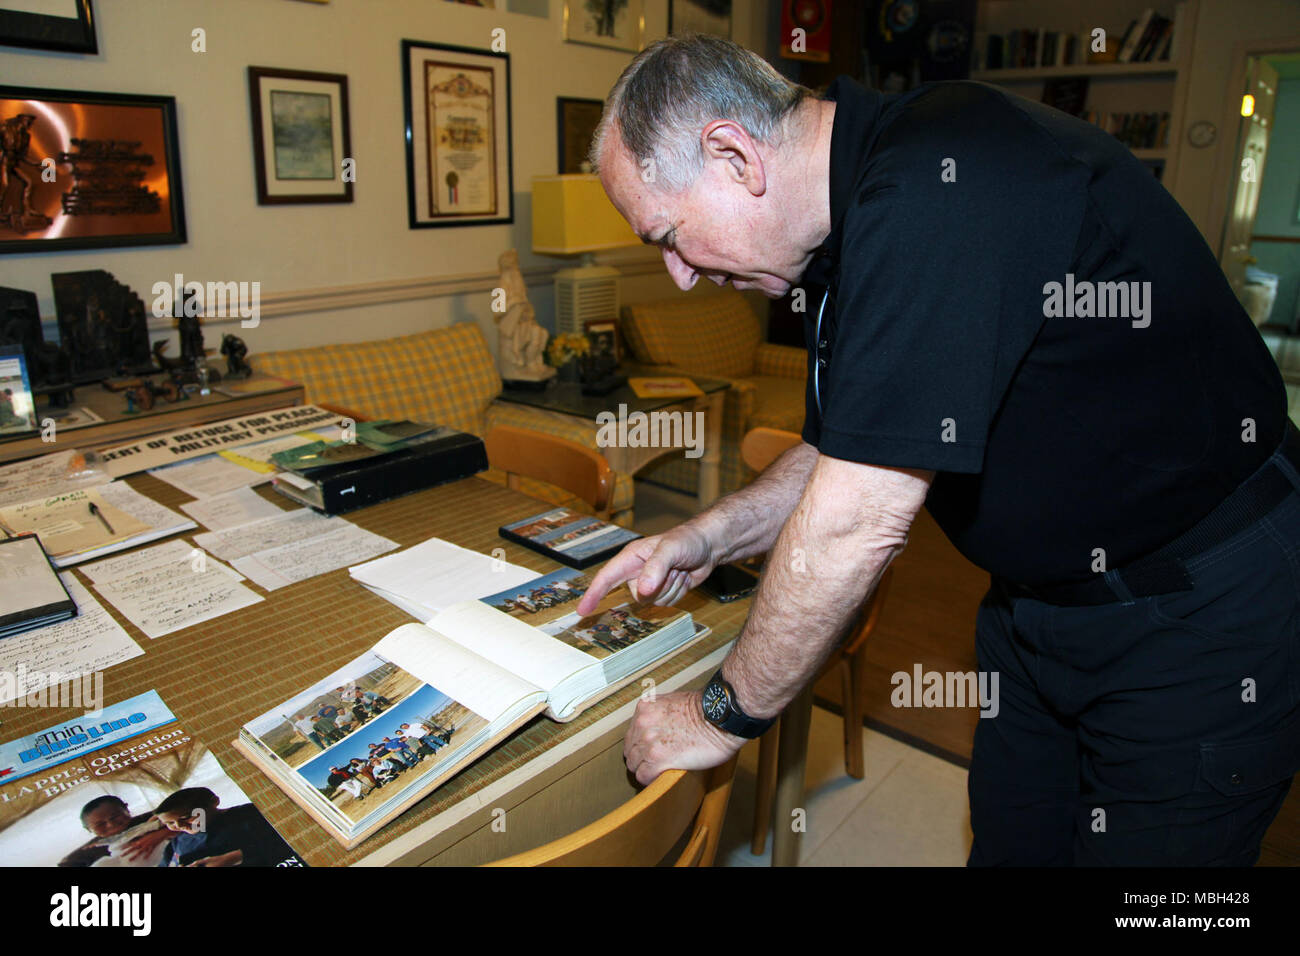 Father Michael McCullough, founder of the Desert Refuge for Peace Officers and Military Personnel, shows photos of events held at the Joshua Tree, Calif., facility during a tour March 7, 2018. McCullough is a Catholic priest and Los Angeles Police Department chaplain. Stock Photo